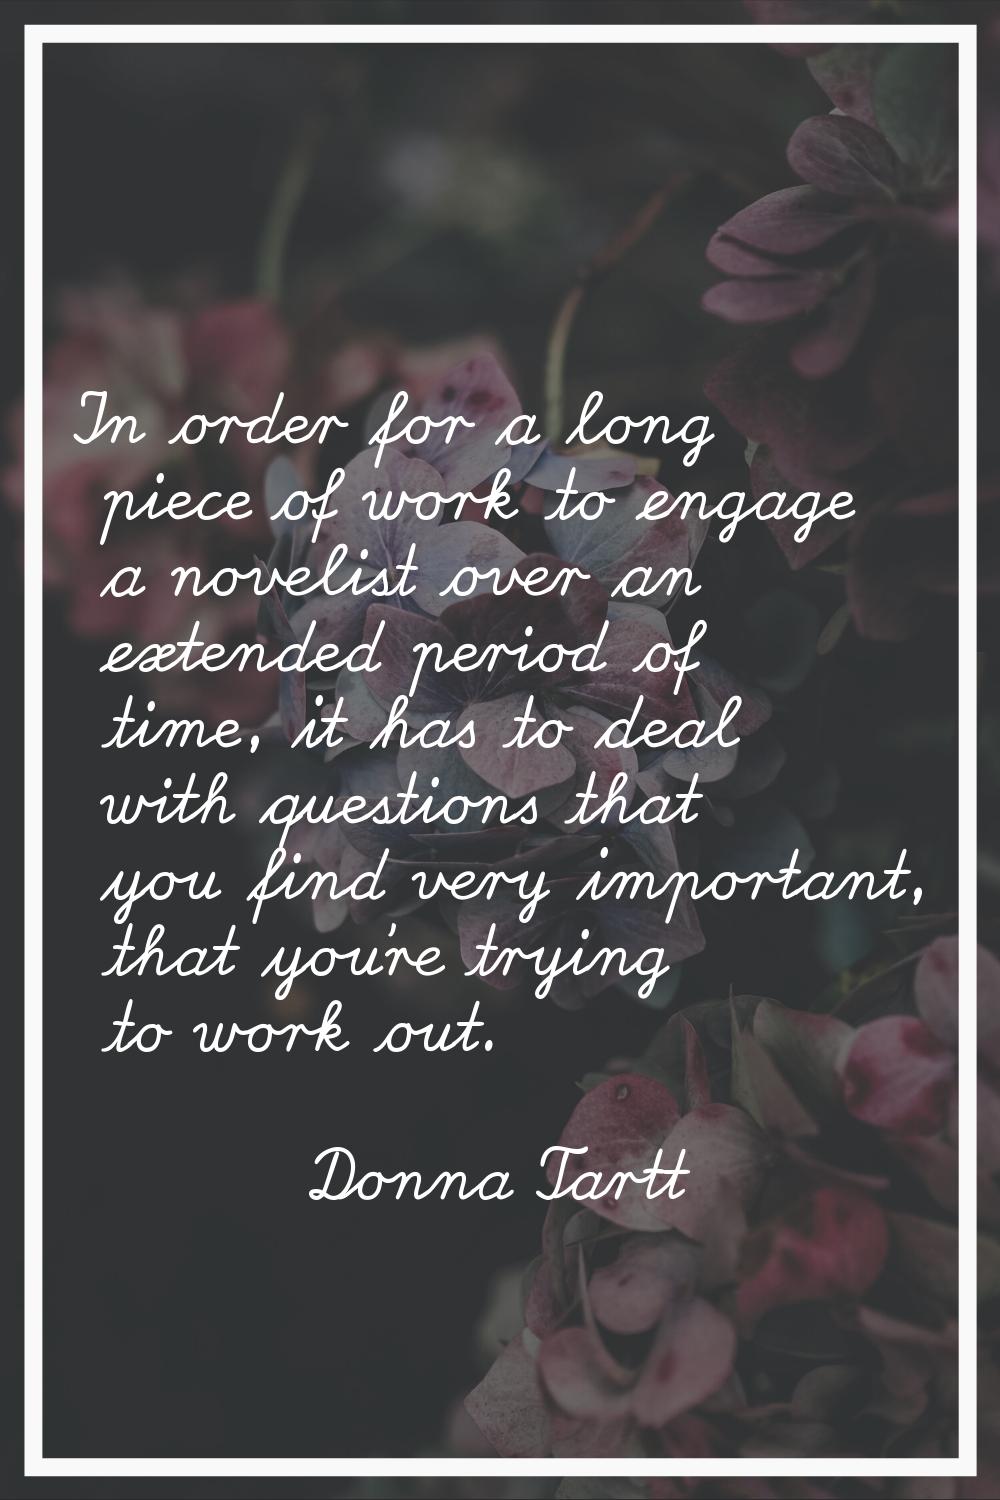 In order for a long piece of work to engage a novelist over an extended period of time, it has to d